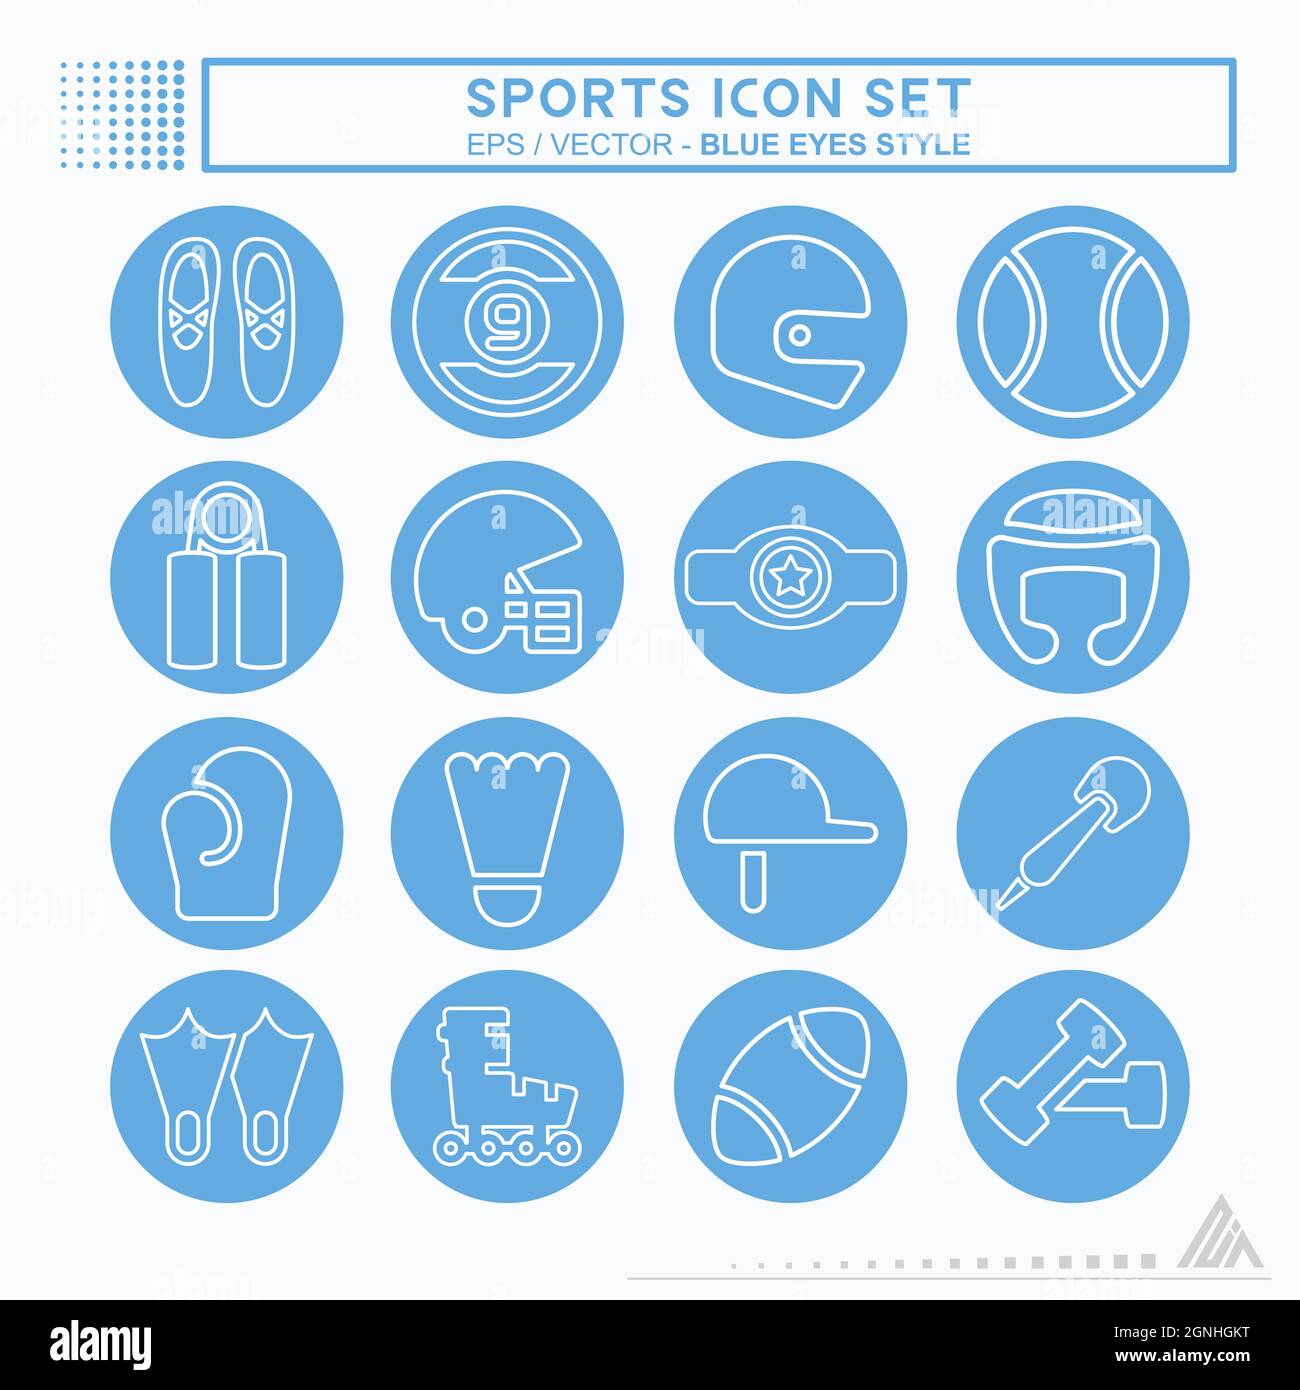 Set Icon Sports - Blue Eyes Style - Simple illustration, Editable stroke, Design template vector, Good for prints, posters, advertisements, announceme Stock Vector